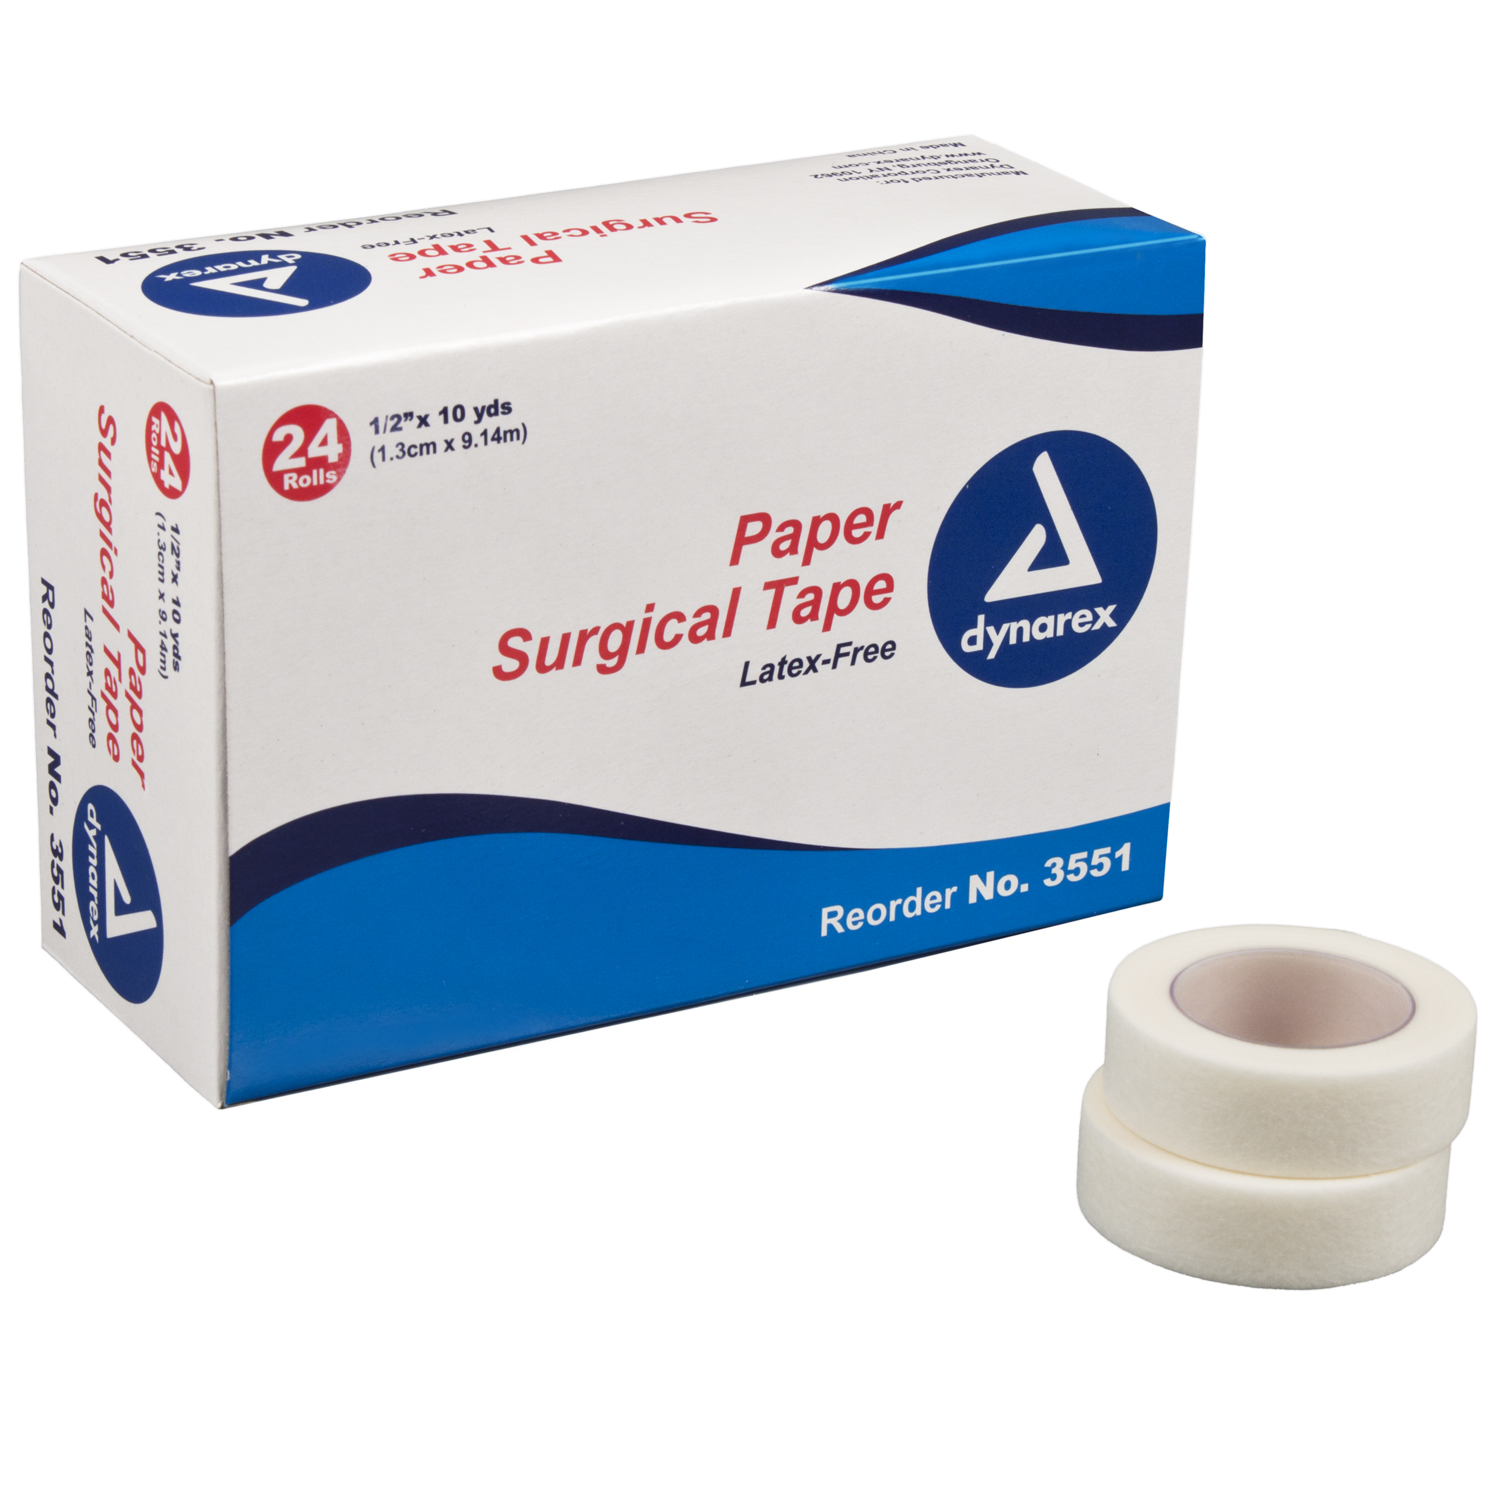 0.5 Inch Paper Surgical Tape: Single Roll